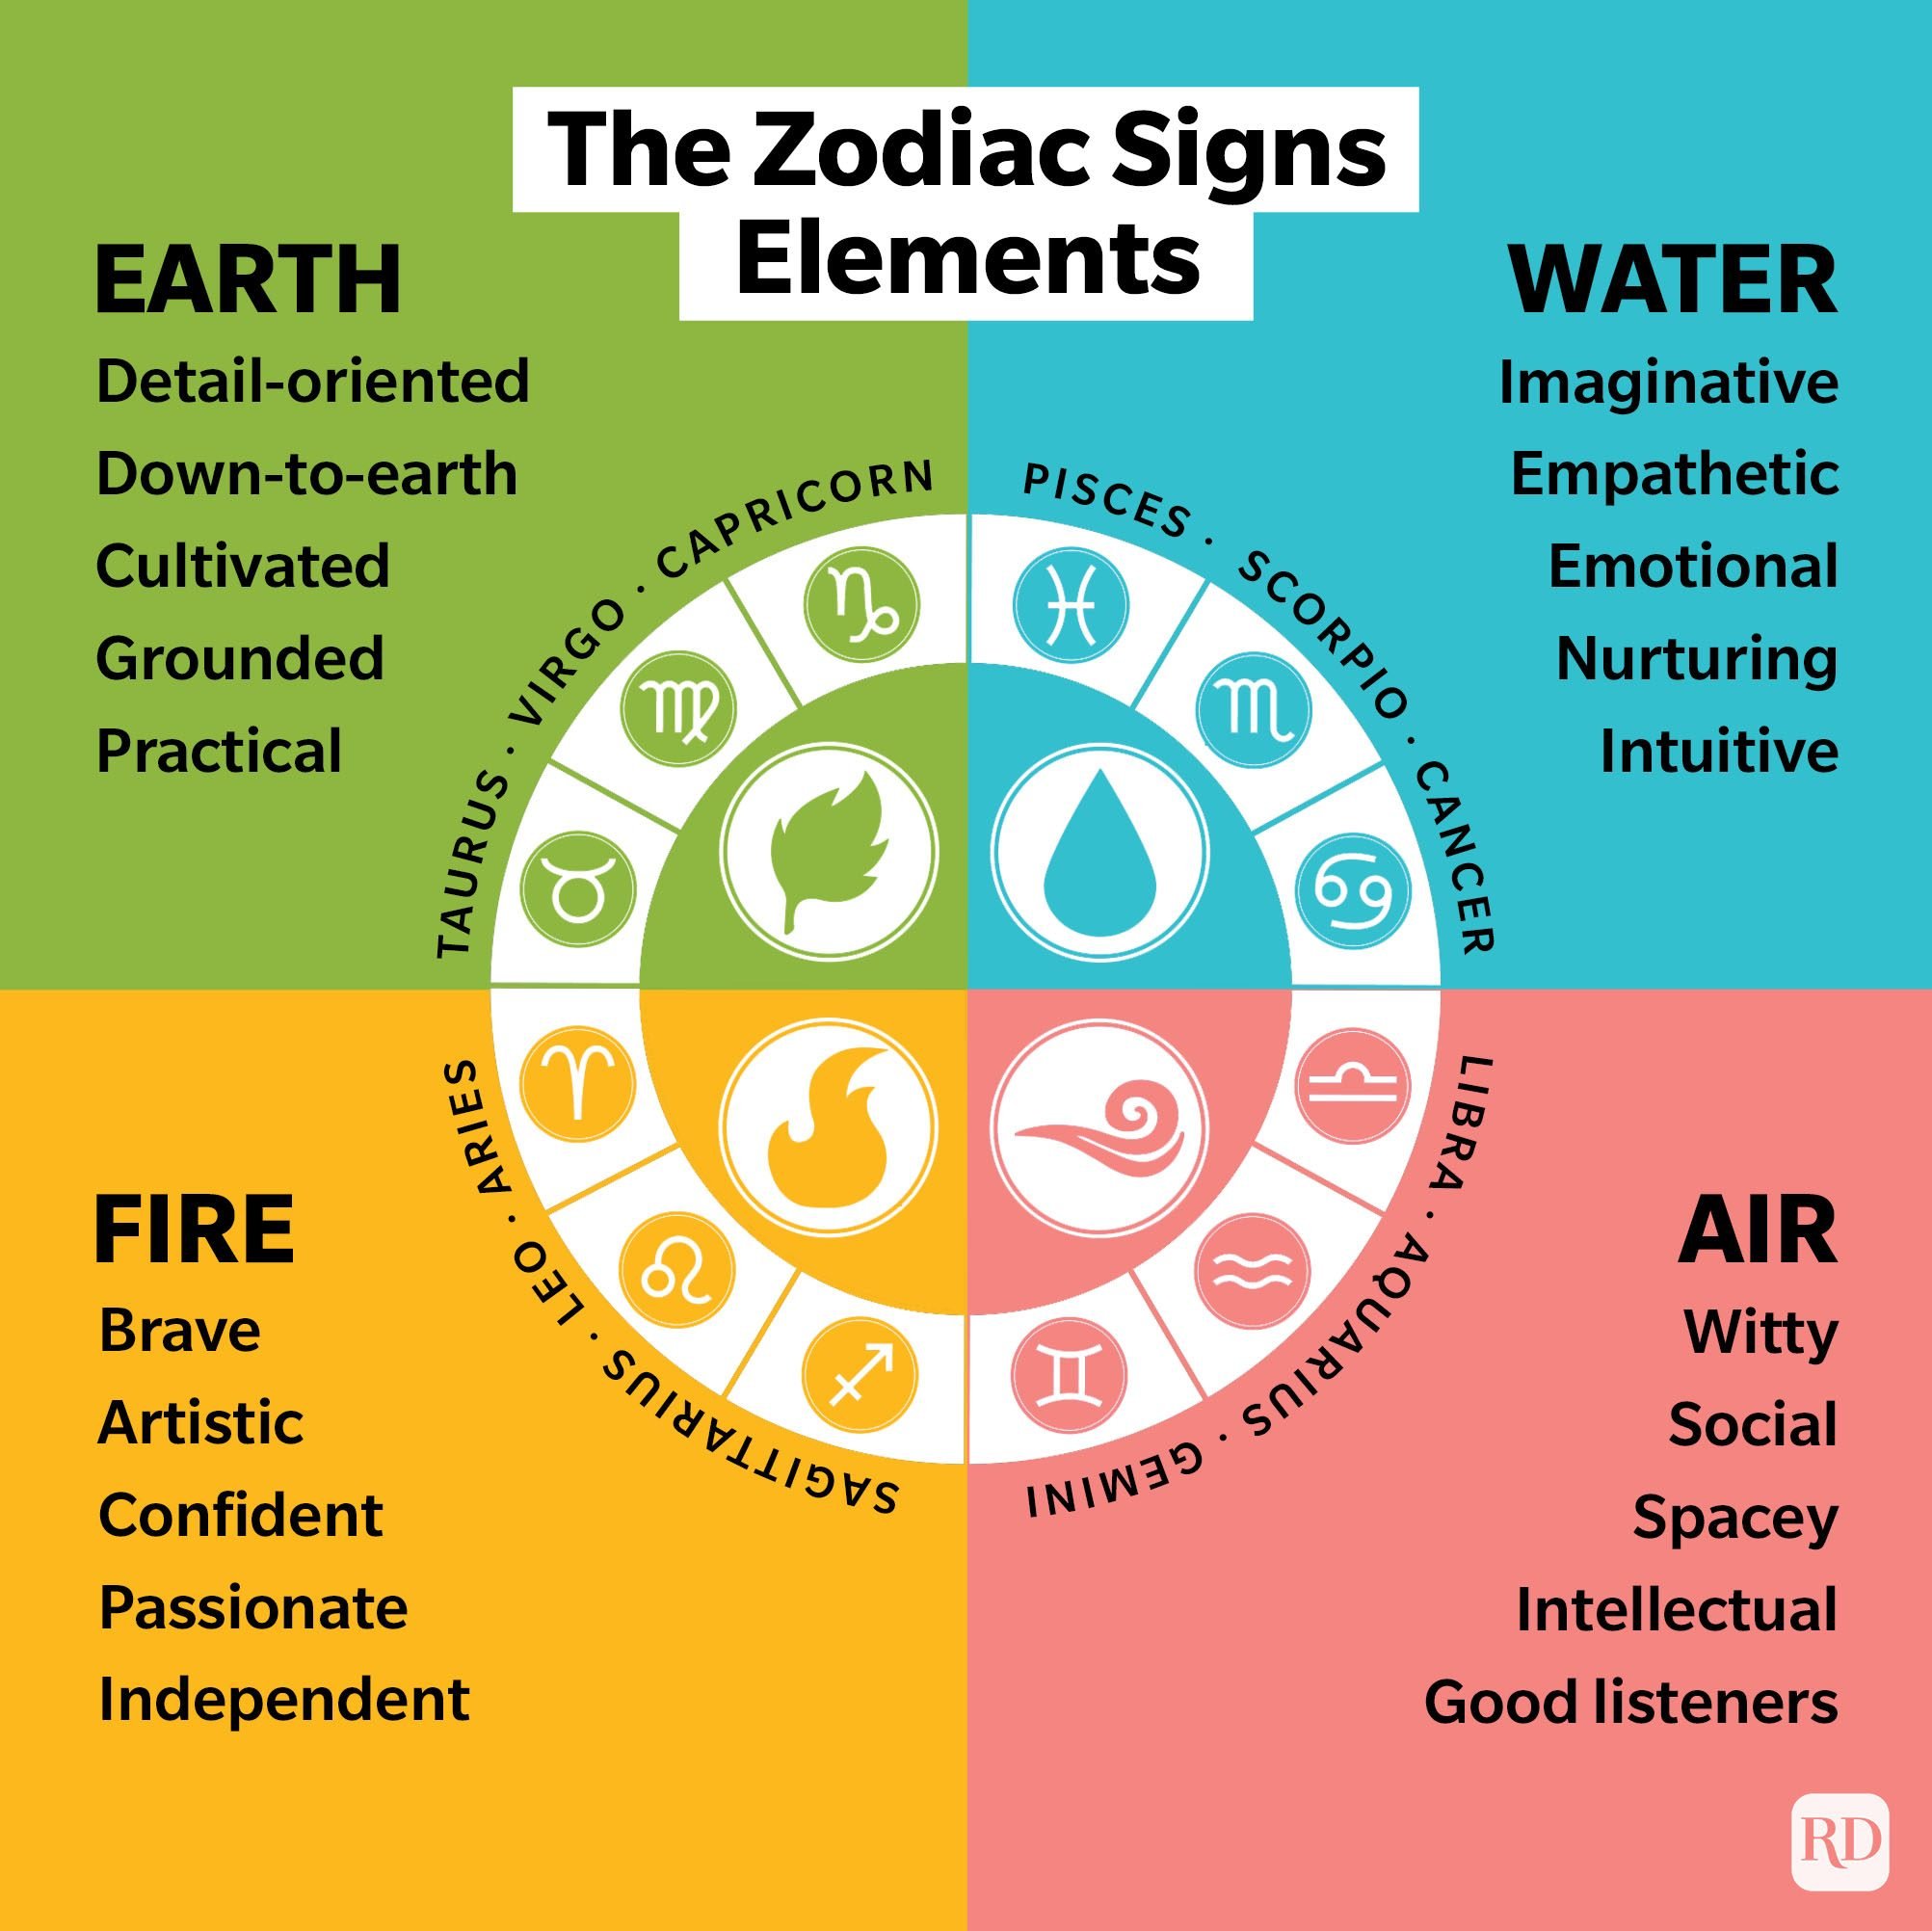 What the Zodiac Signs Elements Mean: Are You Fire, Earth, Air, or